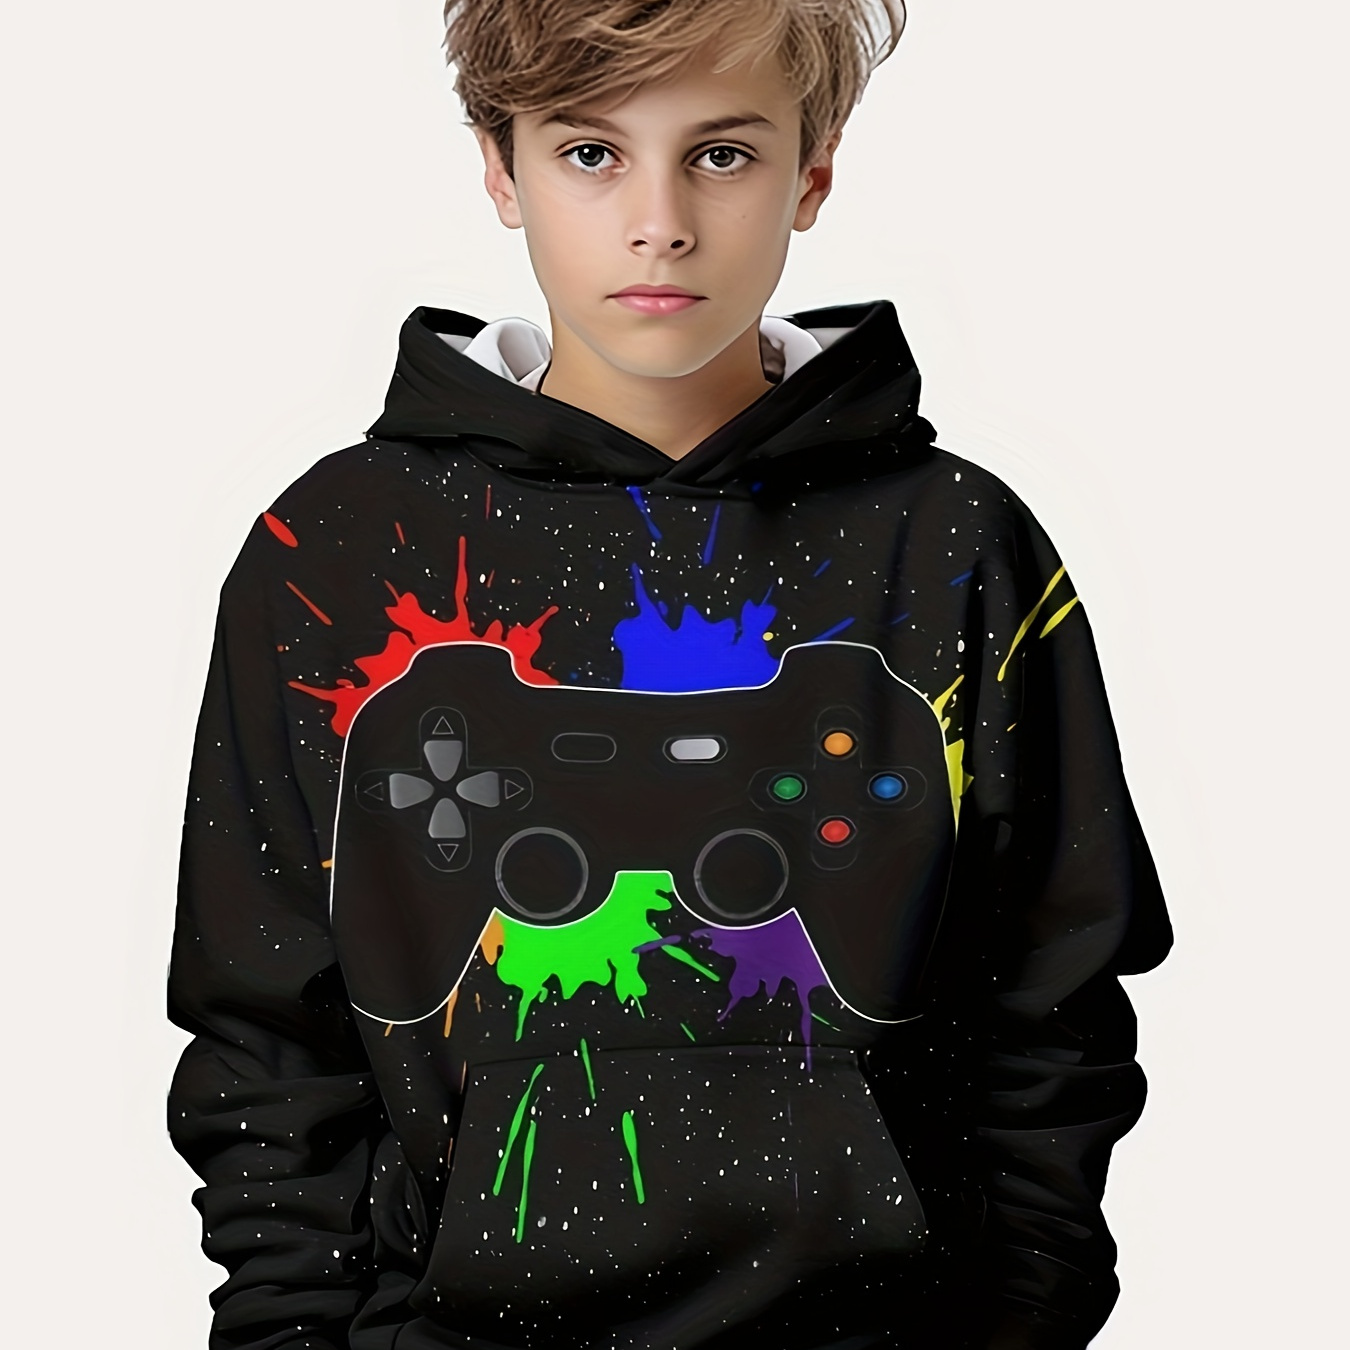 

Cool Gamepad 3d Print Boys Long Sleeve Hoodie, Stay Stylish And Cozy Sweatshirt - Perfect Spring Fall Winter Essential For Your Little Fashionista!